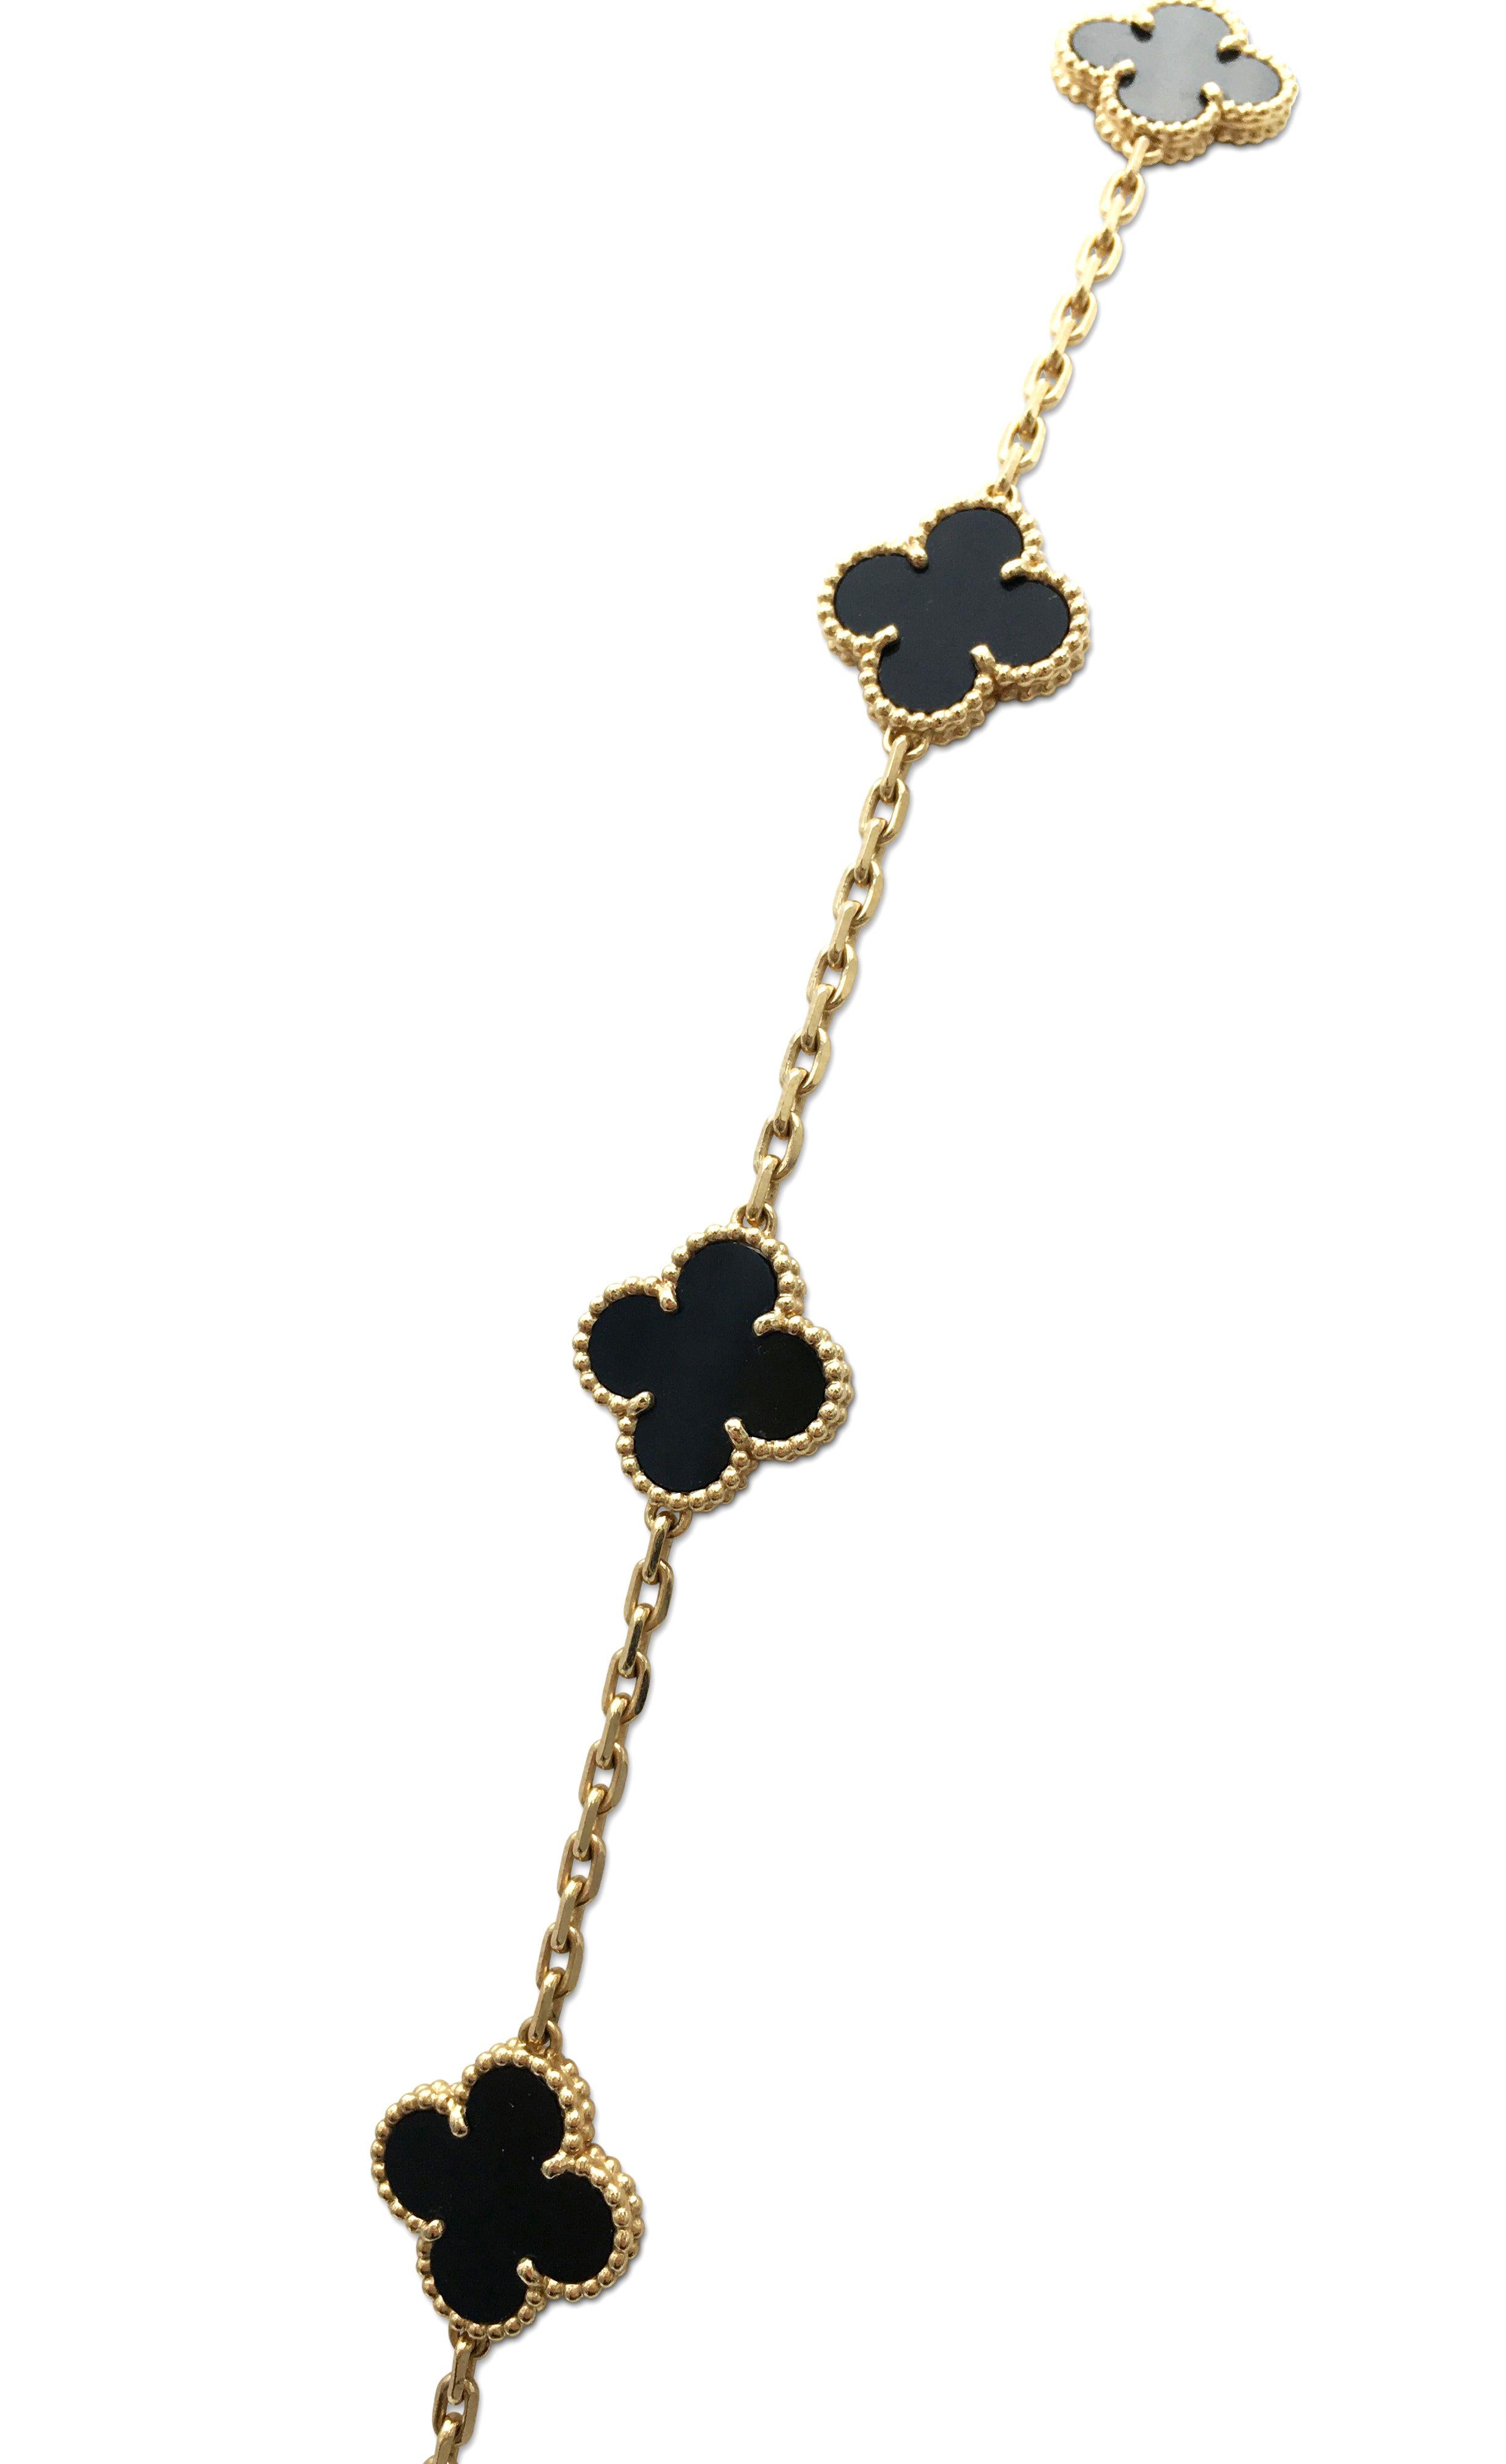 Authentic Van Cleef & Arpels 'Vintage Alhambra' necklace crafted in 18 karat yellow gold featuring 20 clover leaf inspired motifs of onyx stones. Signed VCA, Au750, with serial number and hallmarks. The necklace is presented with the original box,